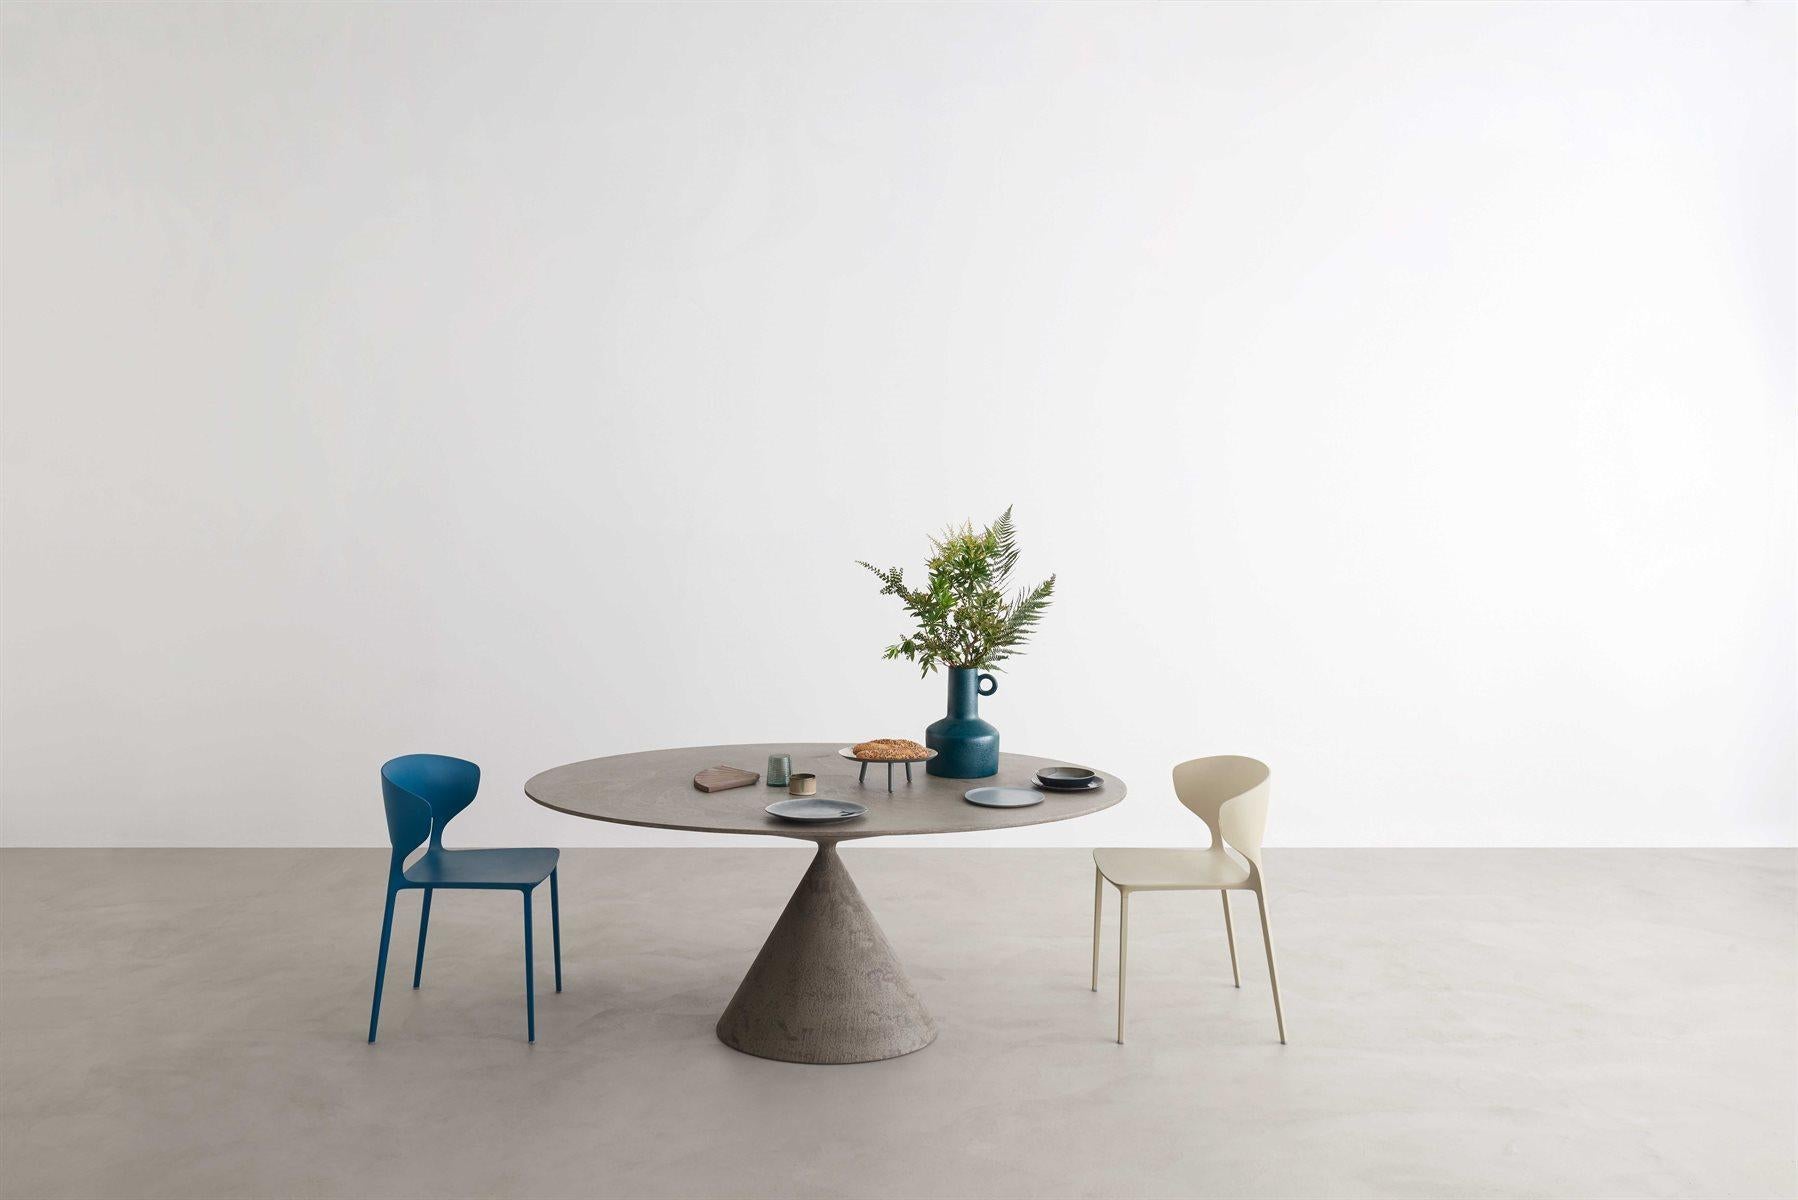 APRIL Desalto OUTDOOR OVAL Clay Table  Designed by Marc Krusin 7